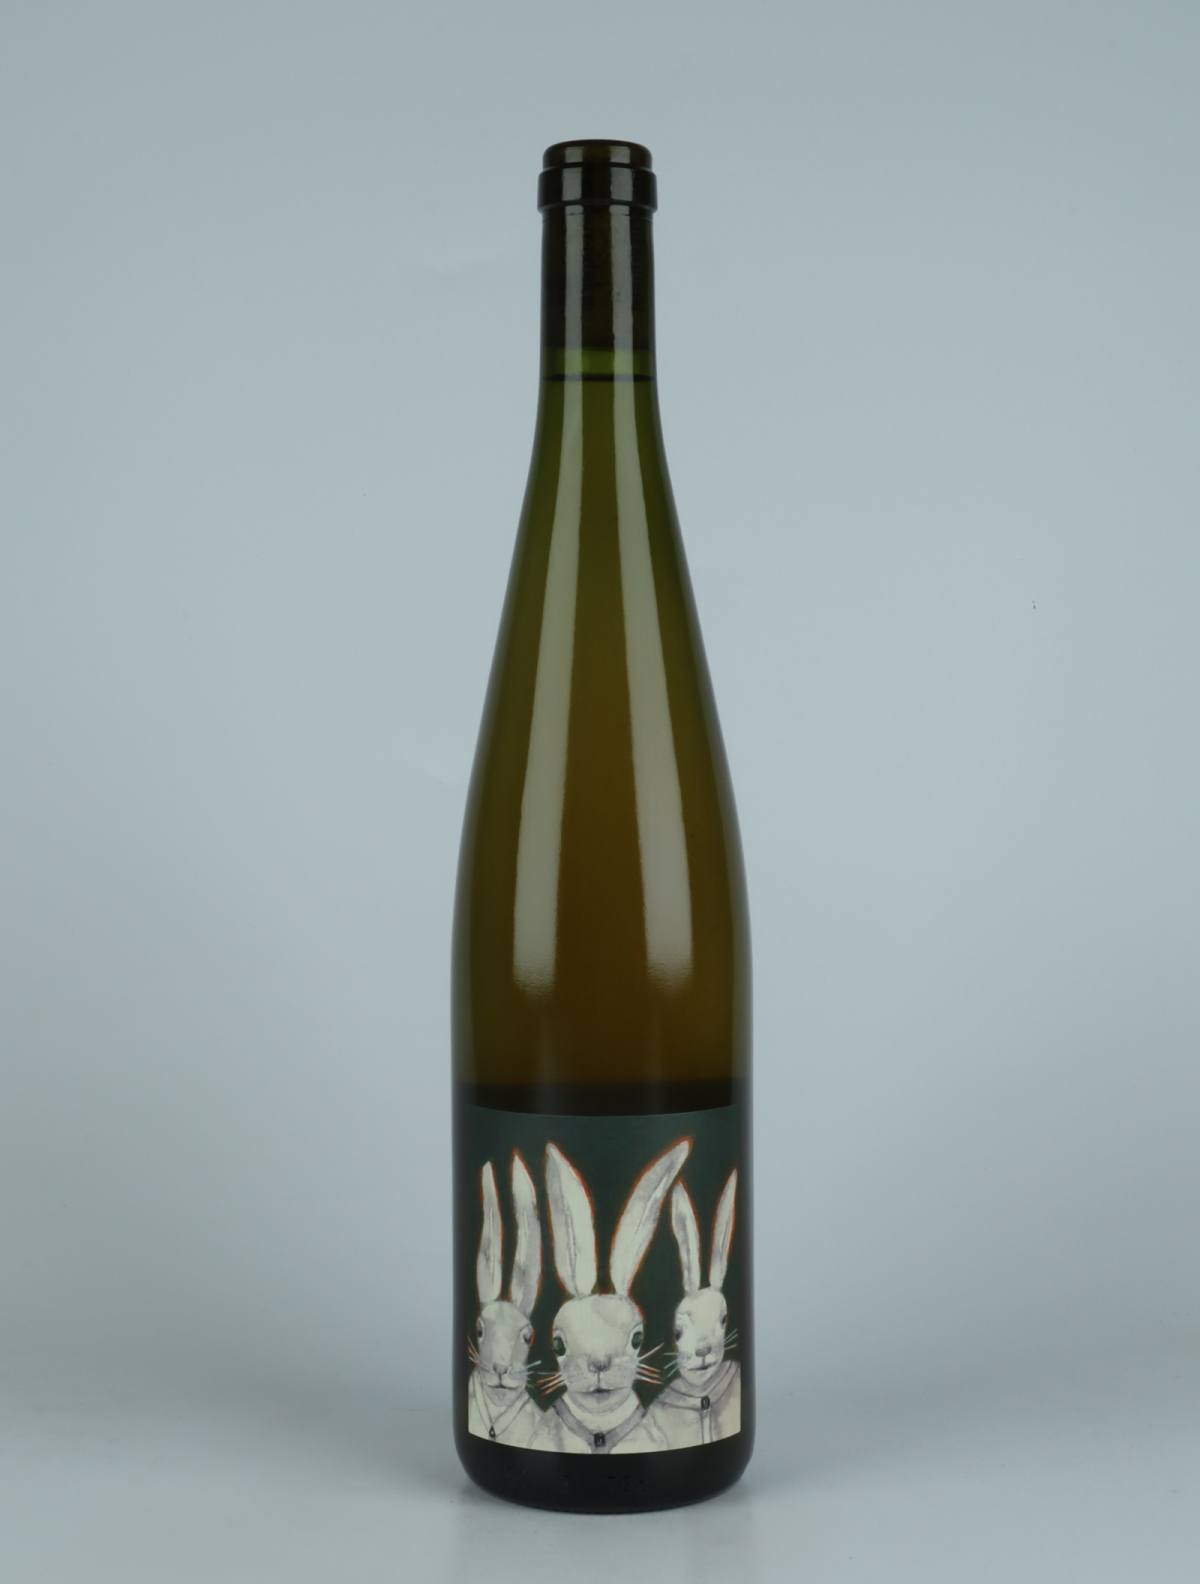 A bottle 2022 Murmure Orange wine from Domaine Rietsch, Alsace in France